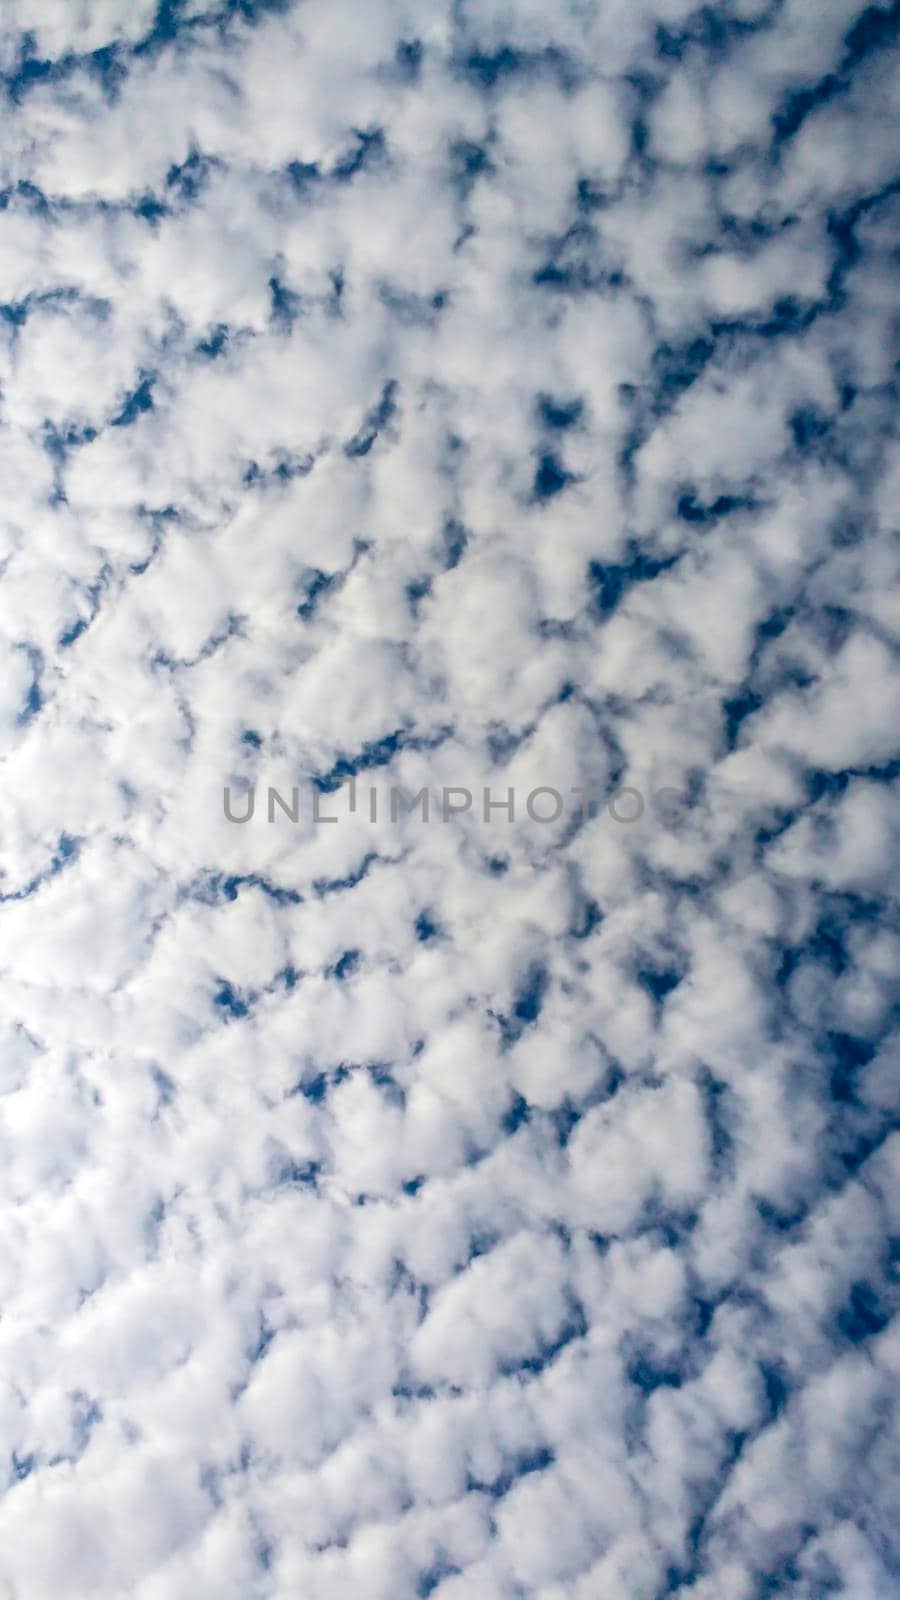 Sky with Altocumulus clouds in Spain by soniabonet